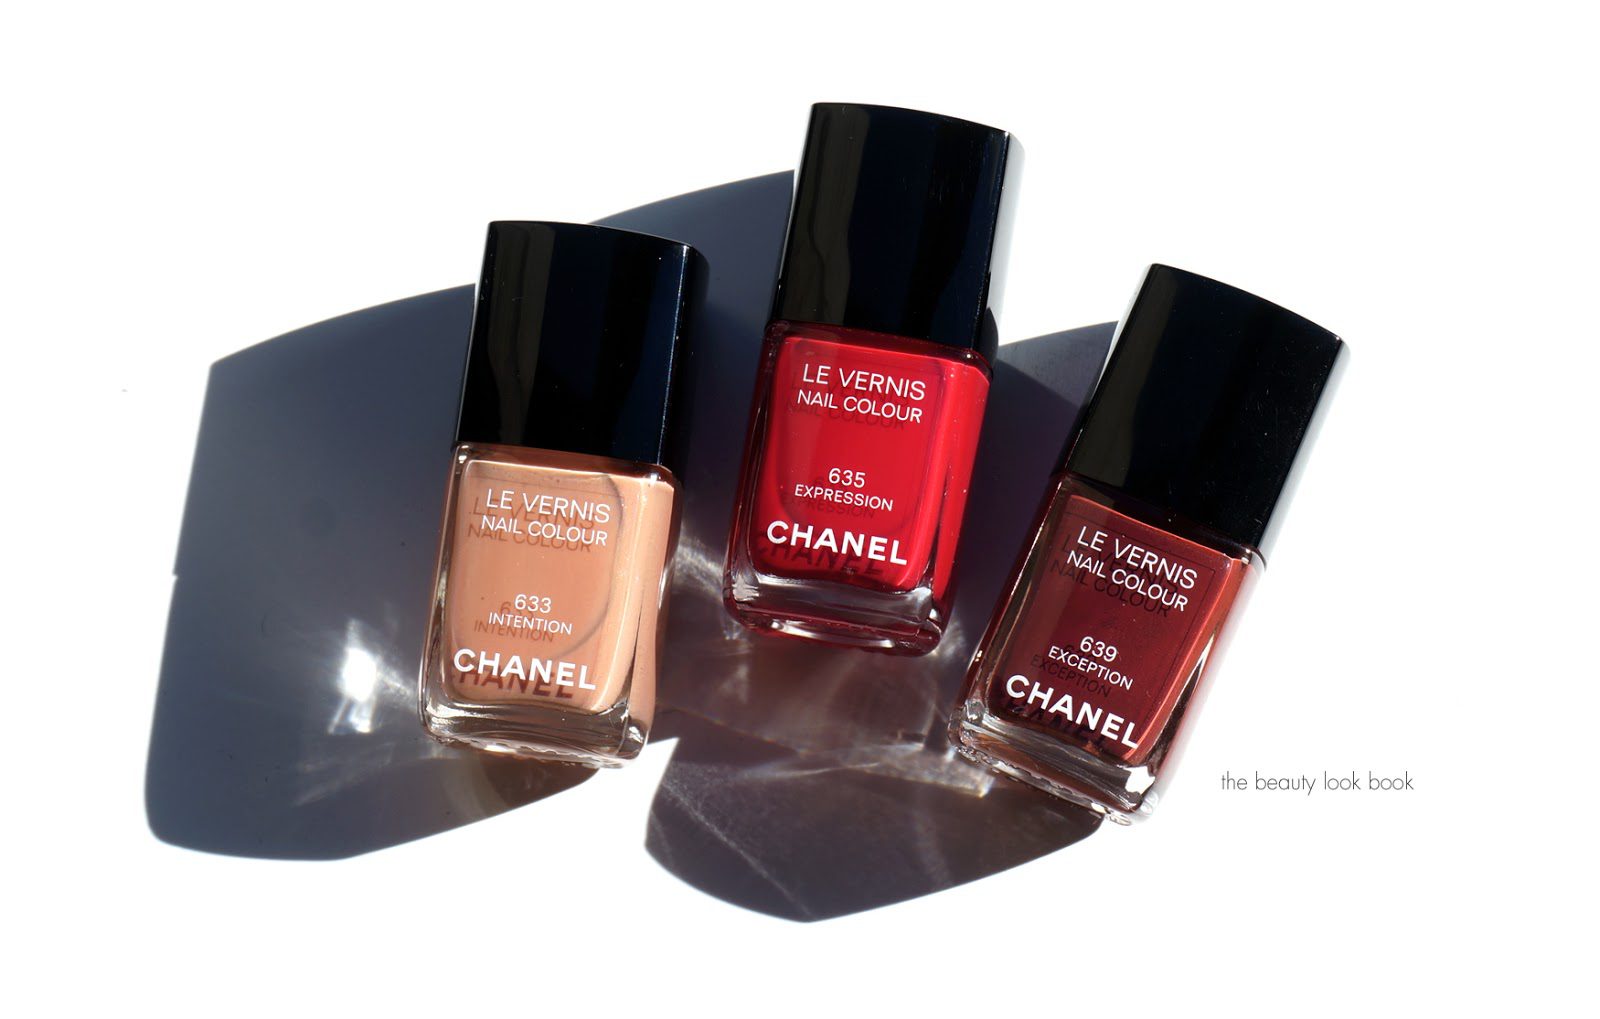 Chanel Le Vernis Nail Colour in Intention 633, Expression 635 and